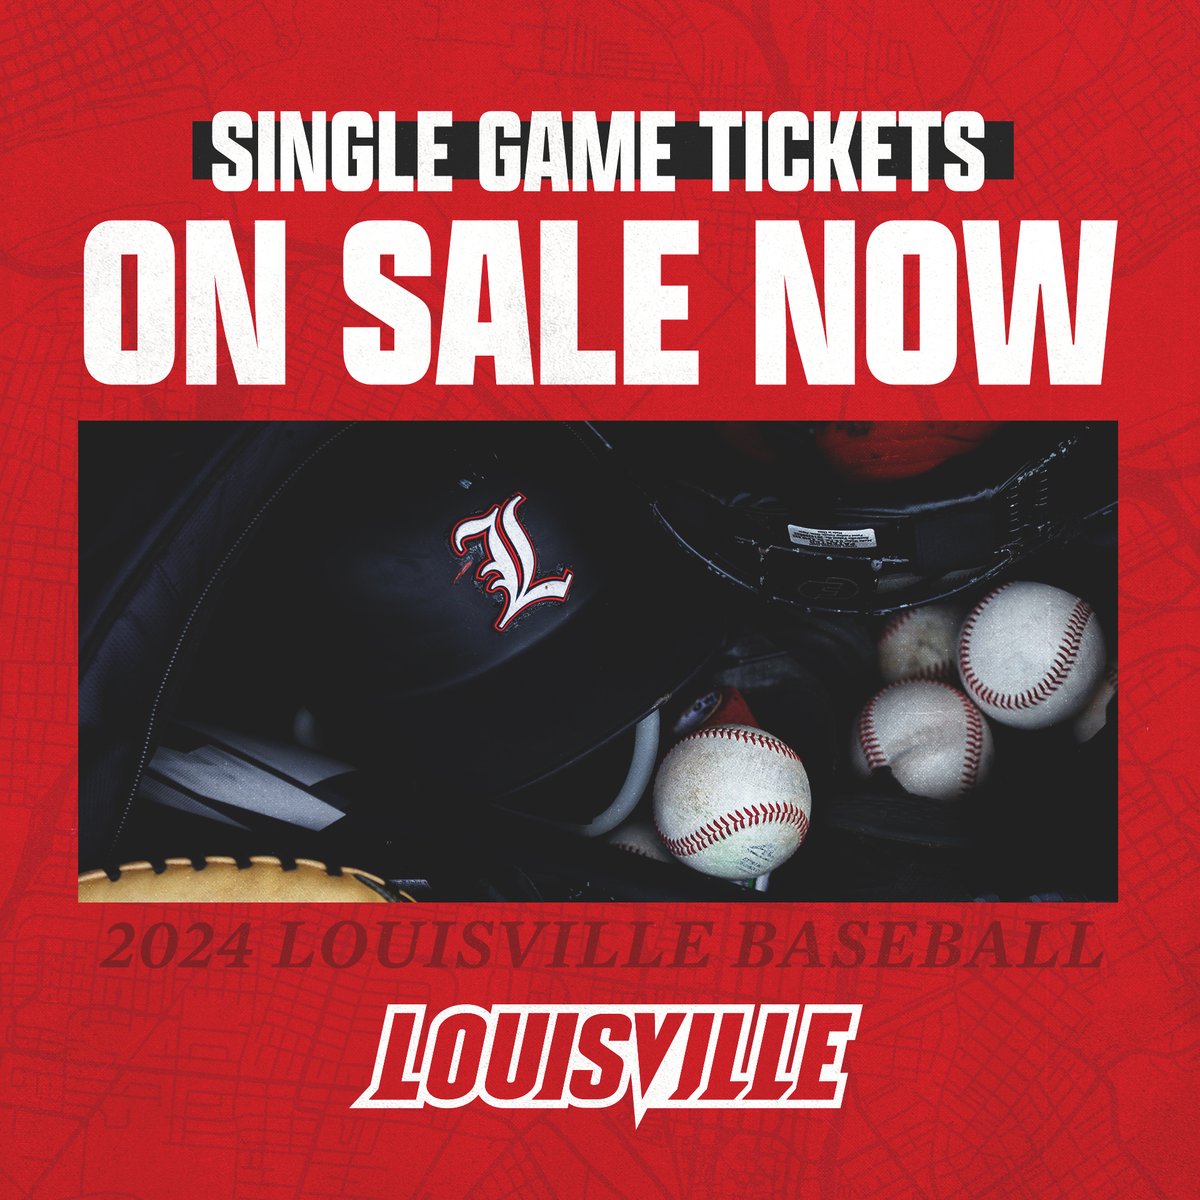 Single game tickets are on sale now. ▪️ ACC series - Virginia Tech, NC State, Virginia, Clemson, Notre Dame ▪️ Kentucky ▪️ Indiana 🎟️ GoCards.com/BSBtickets #GoCards